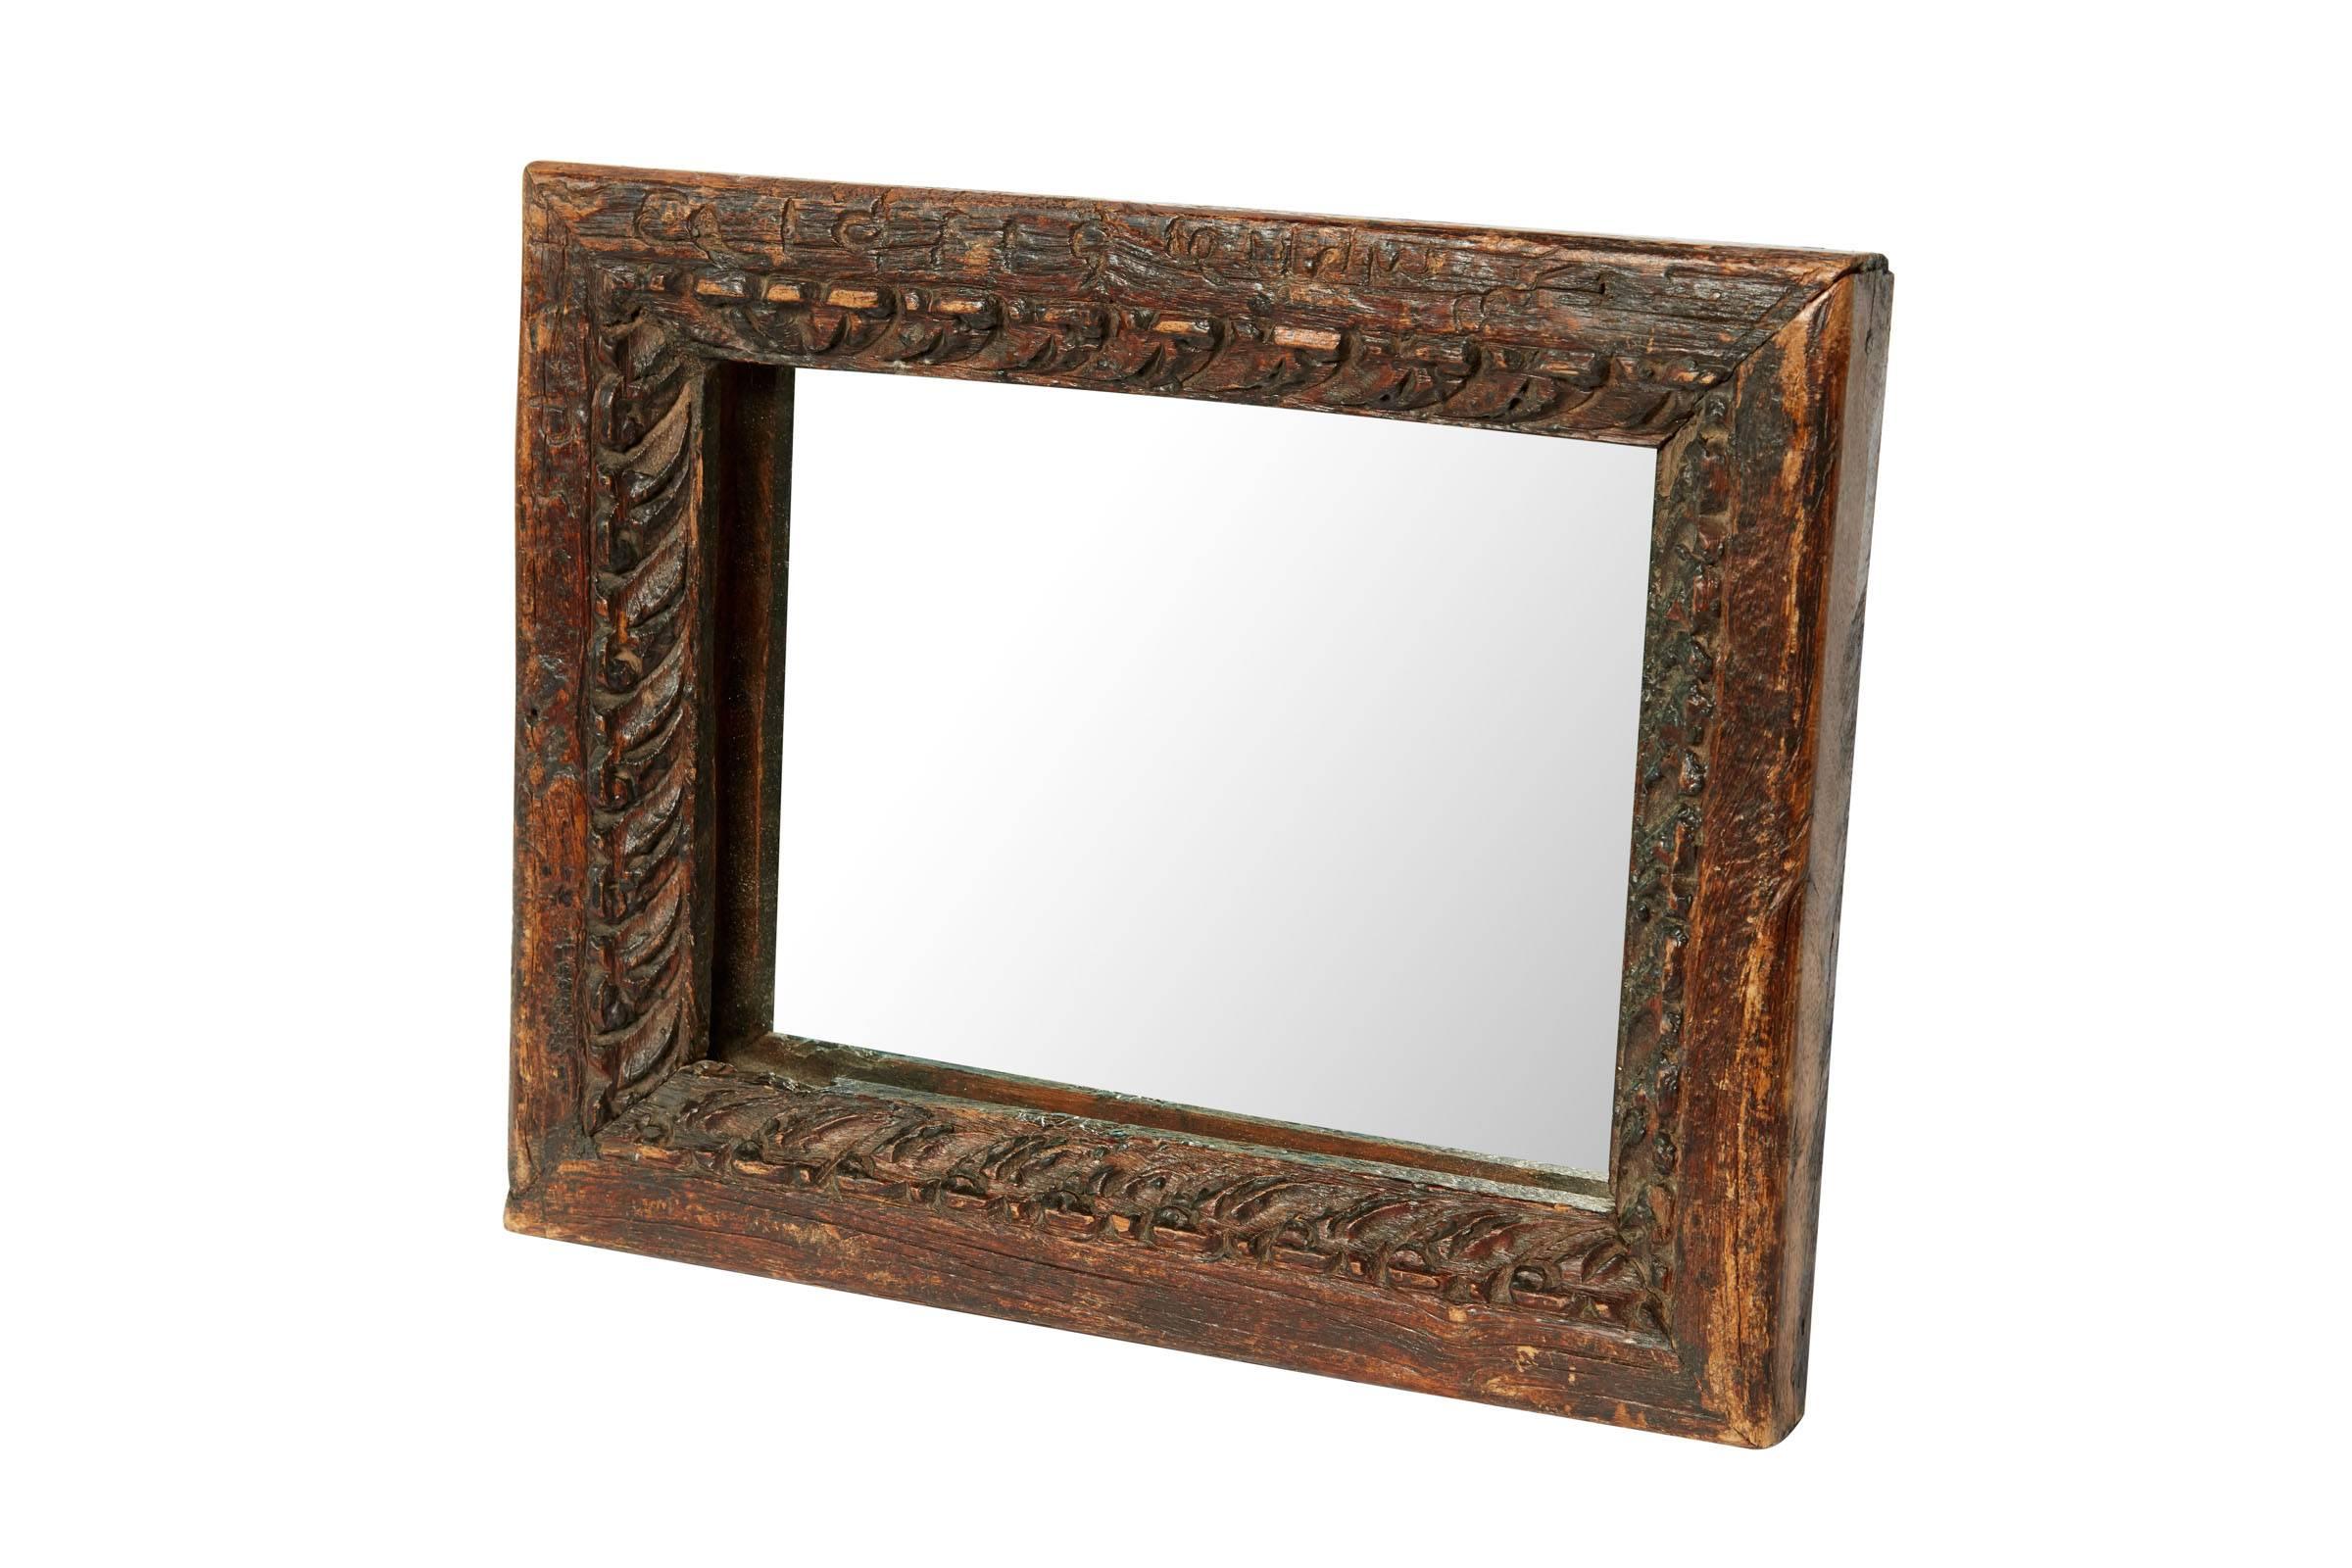 20th century hand-carved wooden mirror from Indonesia.